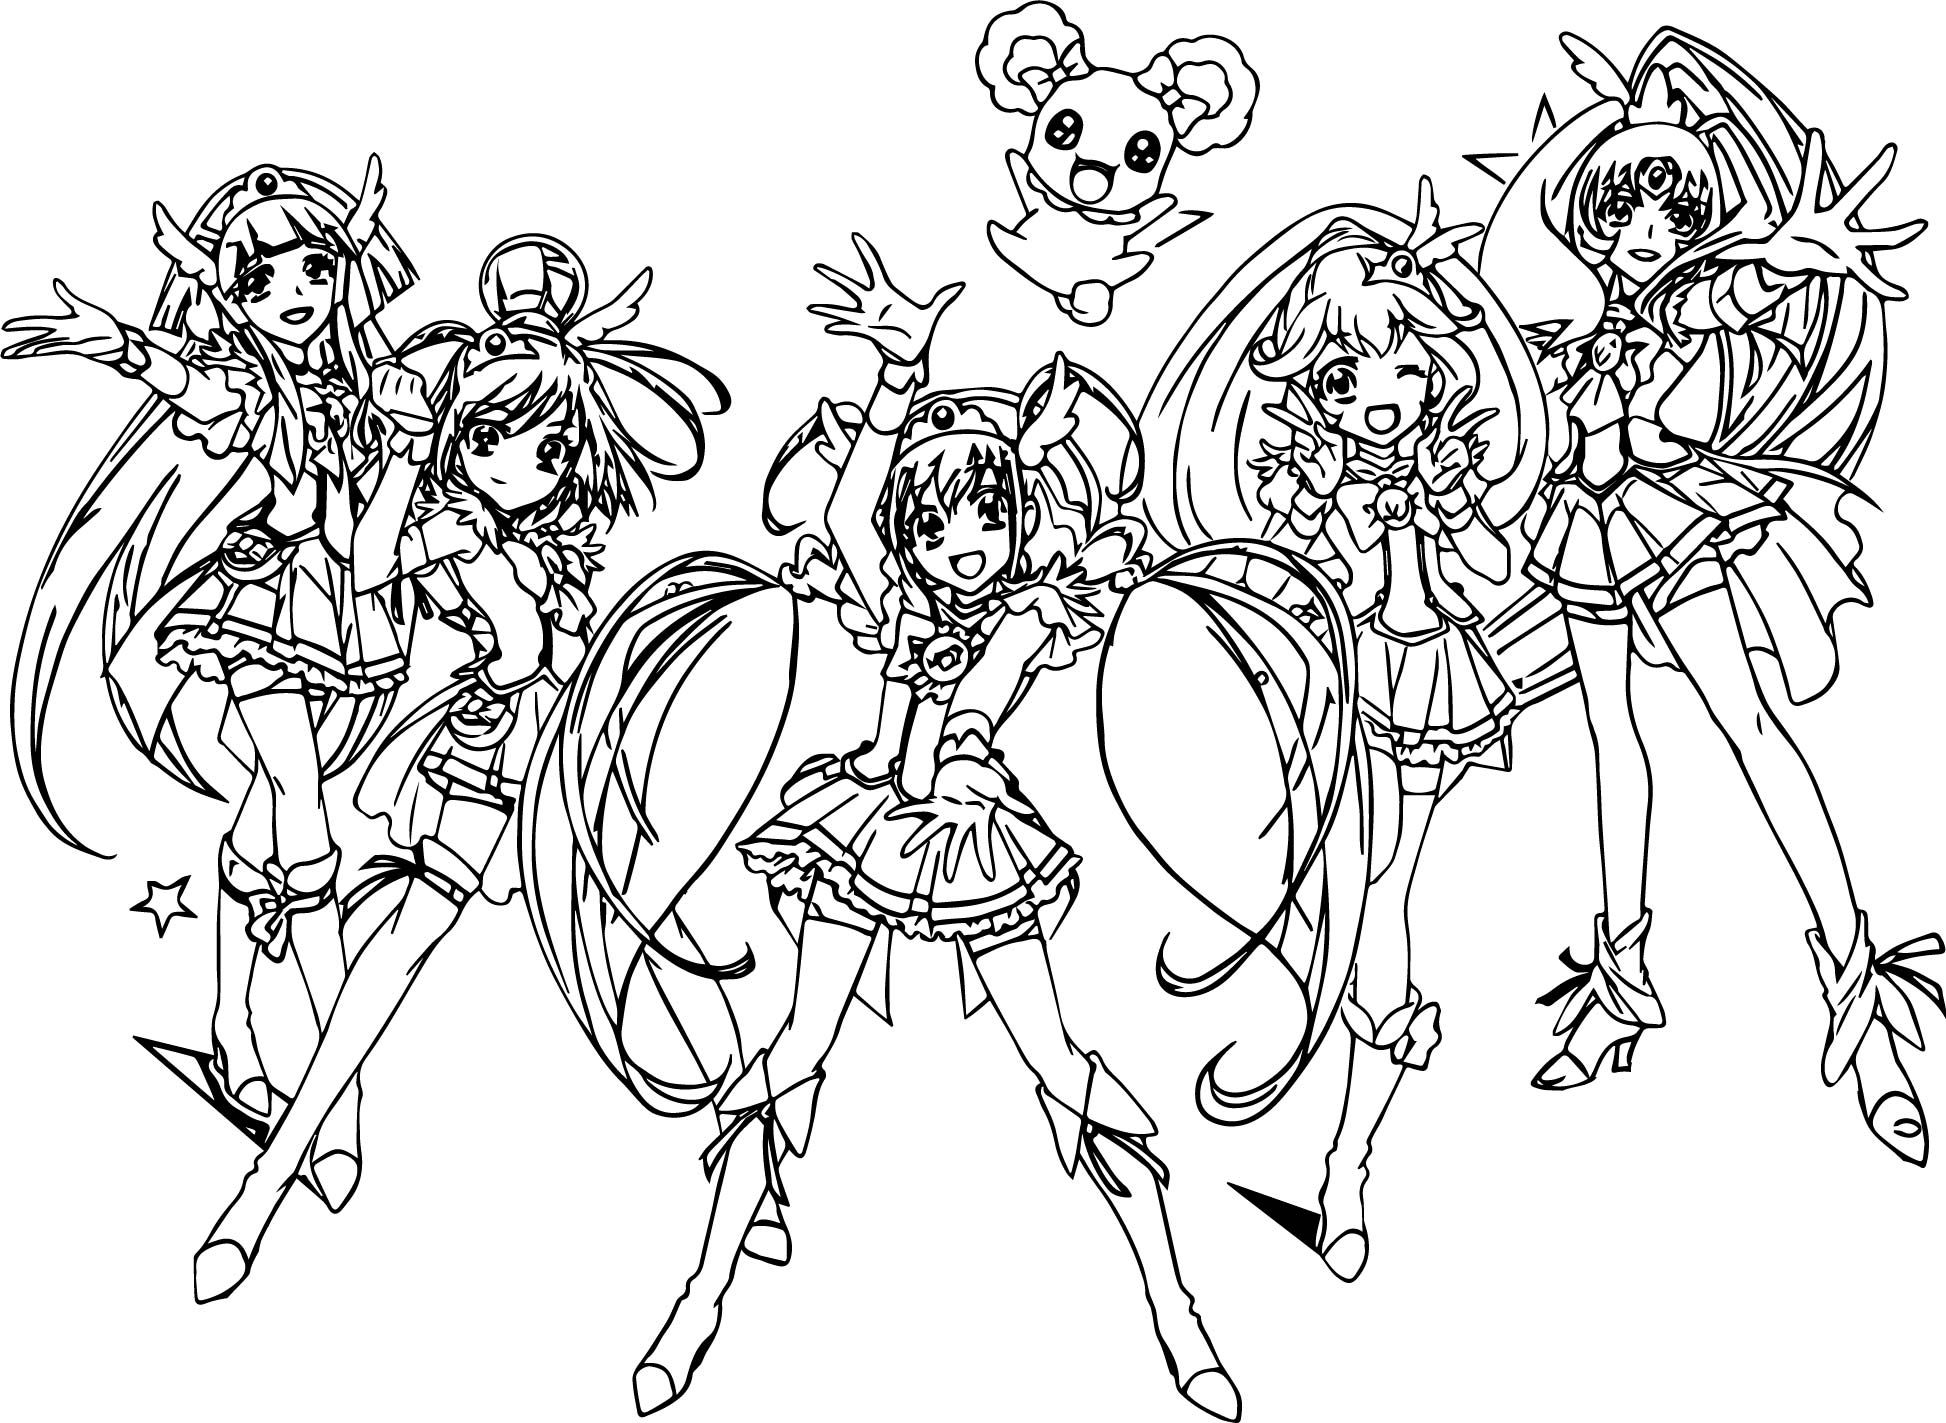 New Glitter Force Coloring Page with simple drawing